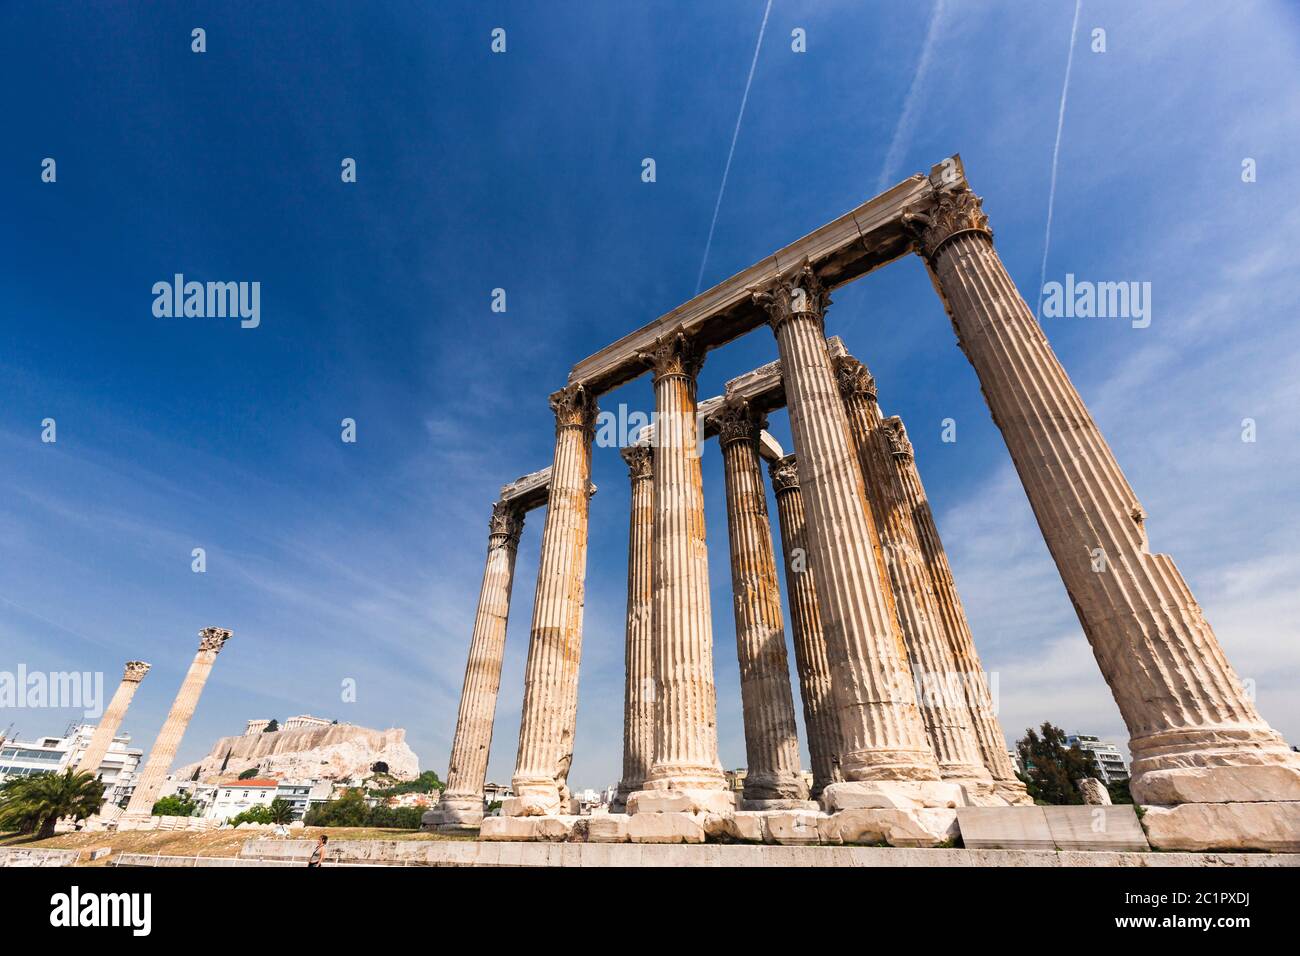 Temple of Zeus and Acropolis of Athens,Temple of Olympian Zeus,Columns of the Olympian Zeus,Athens,Greece,Europe Stock Photo